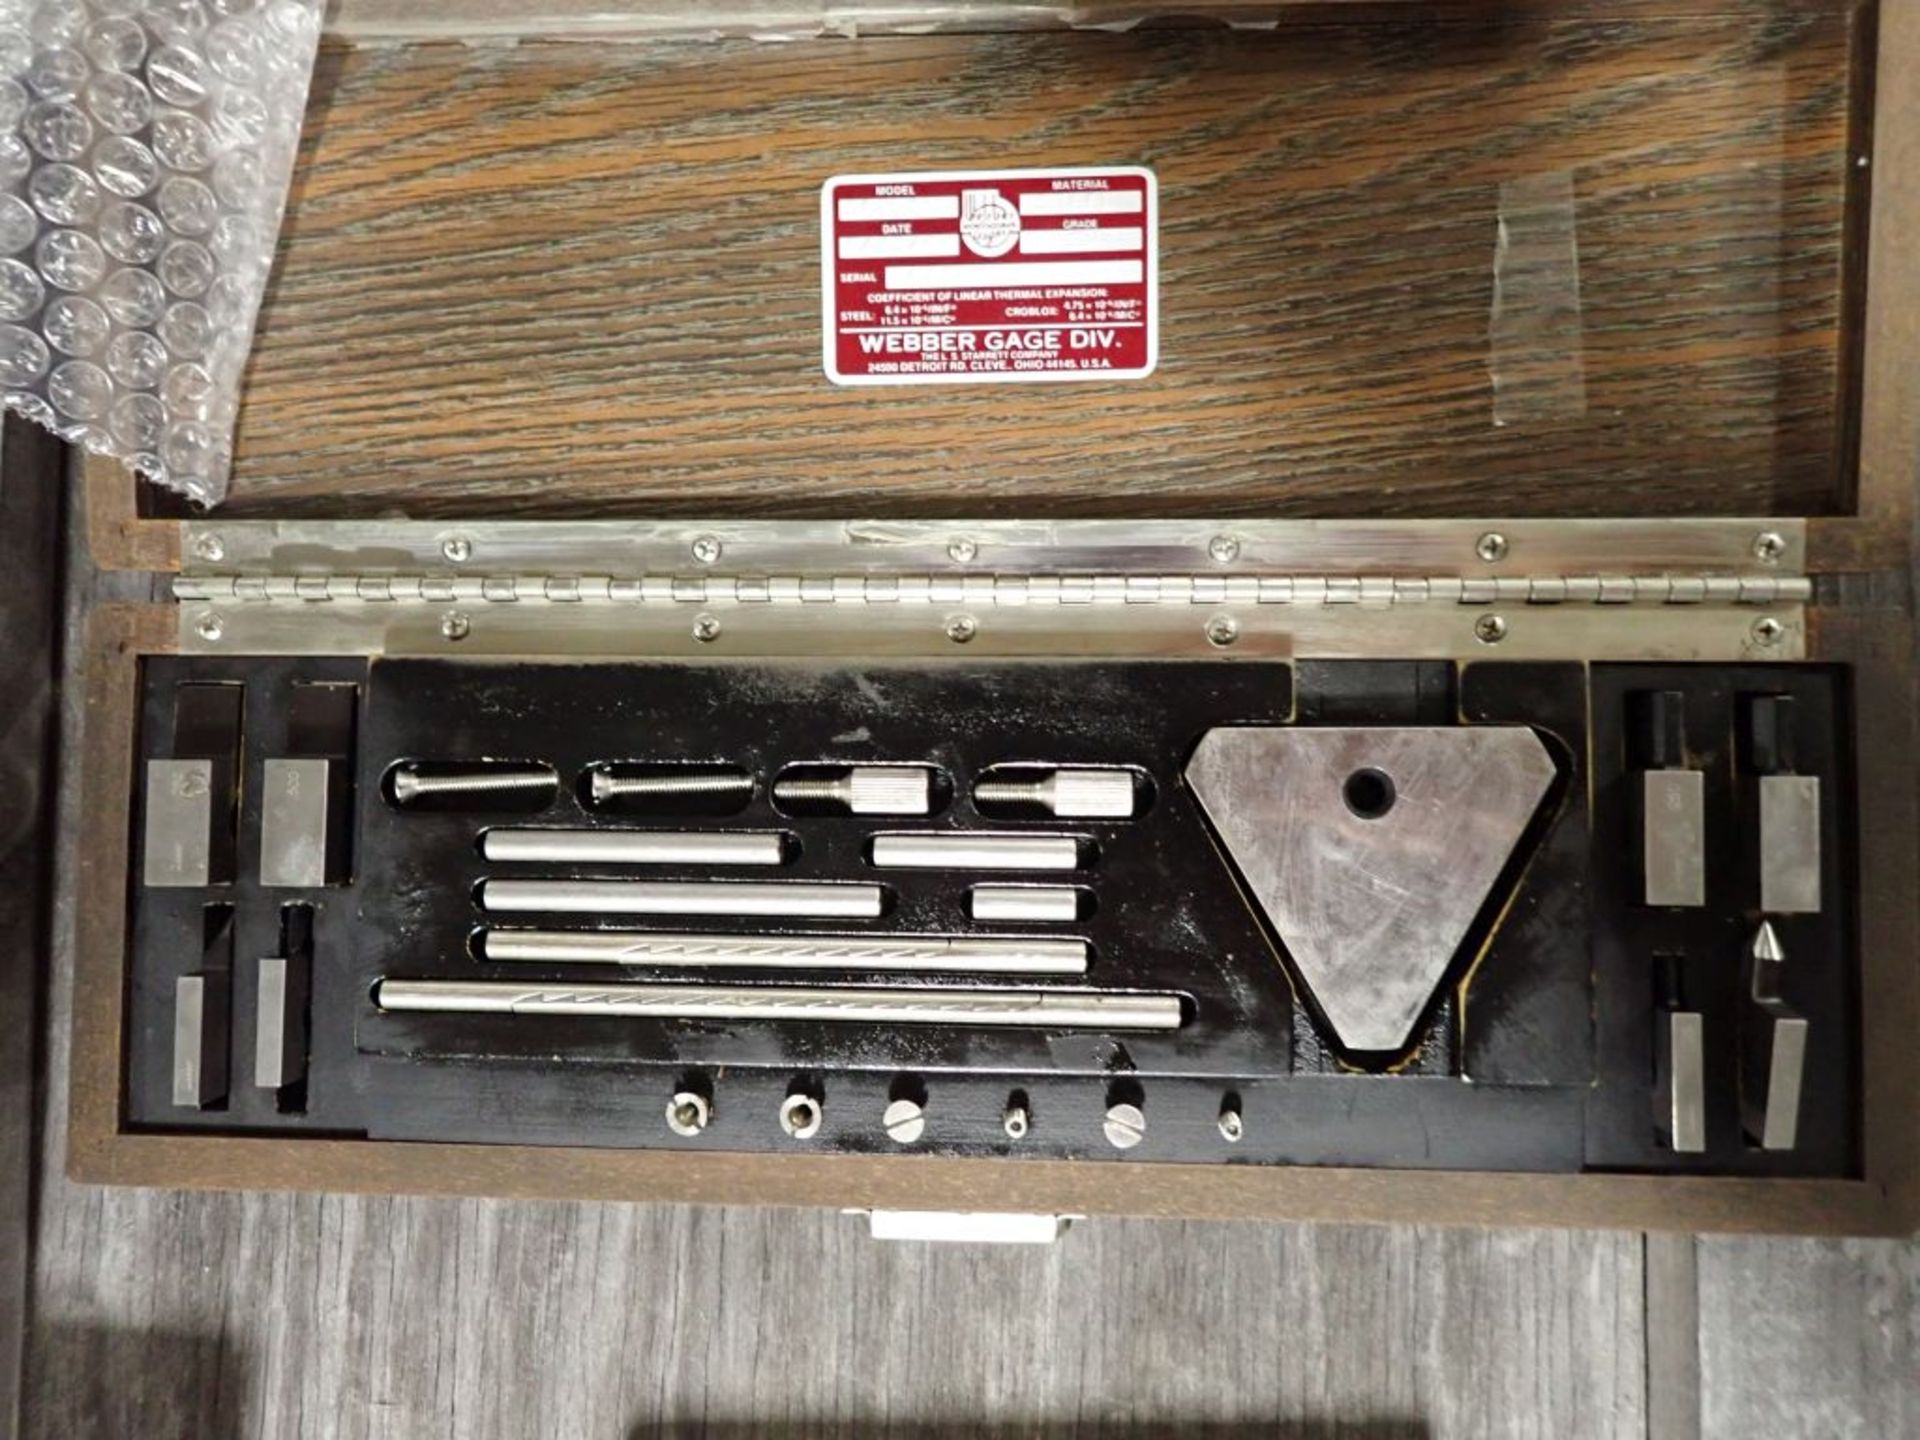 Lot of Assorted Inspection Tools | Tag: 241467 | Limited Forklift Assistance Available - $10.00 - Image 17 of 24